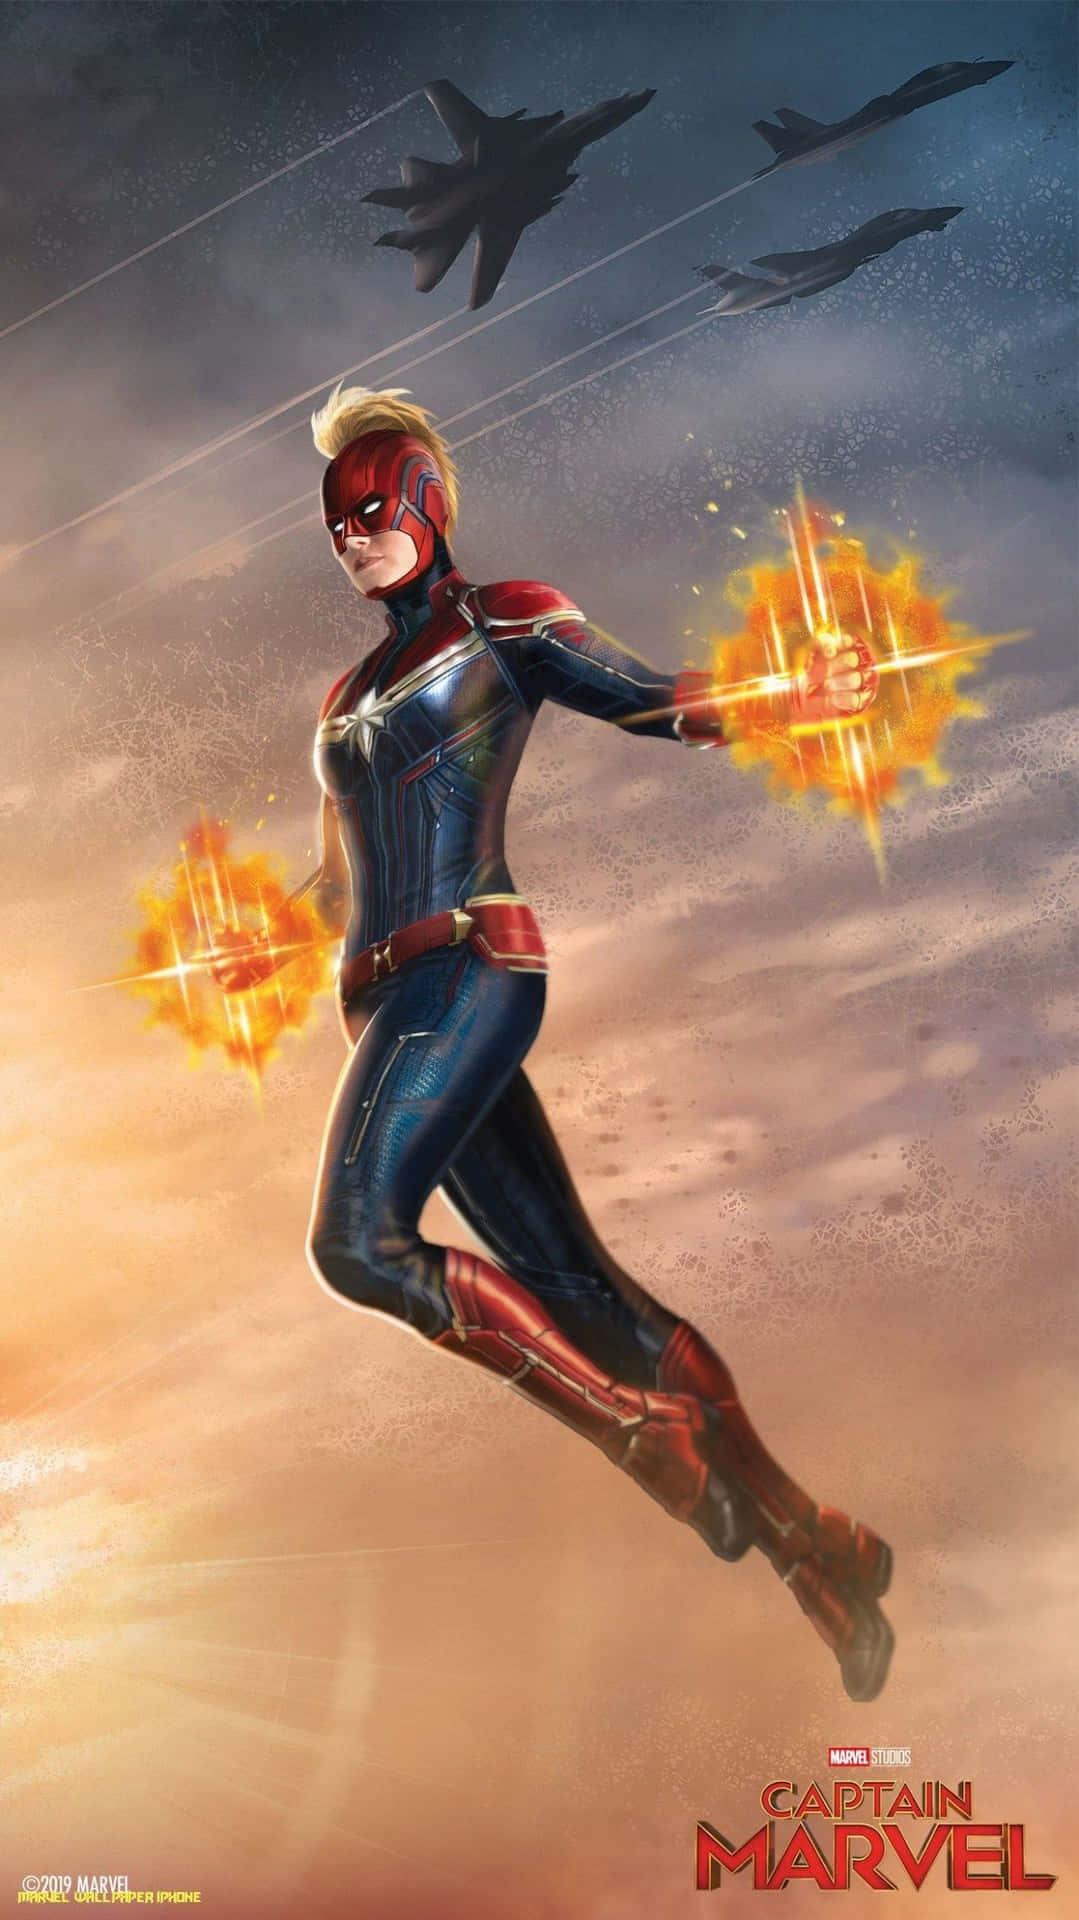 "Let Your Willpower Soar with Captain Marvel 3D" Wallpaper